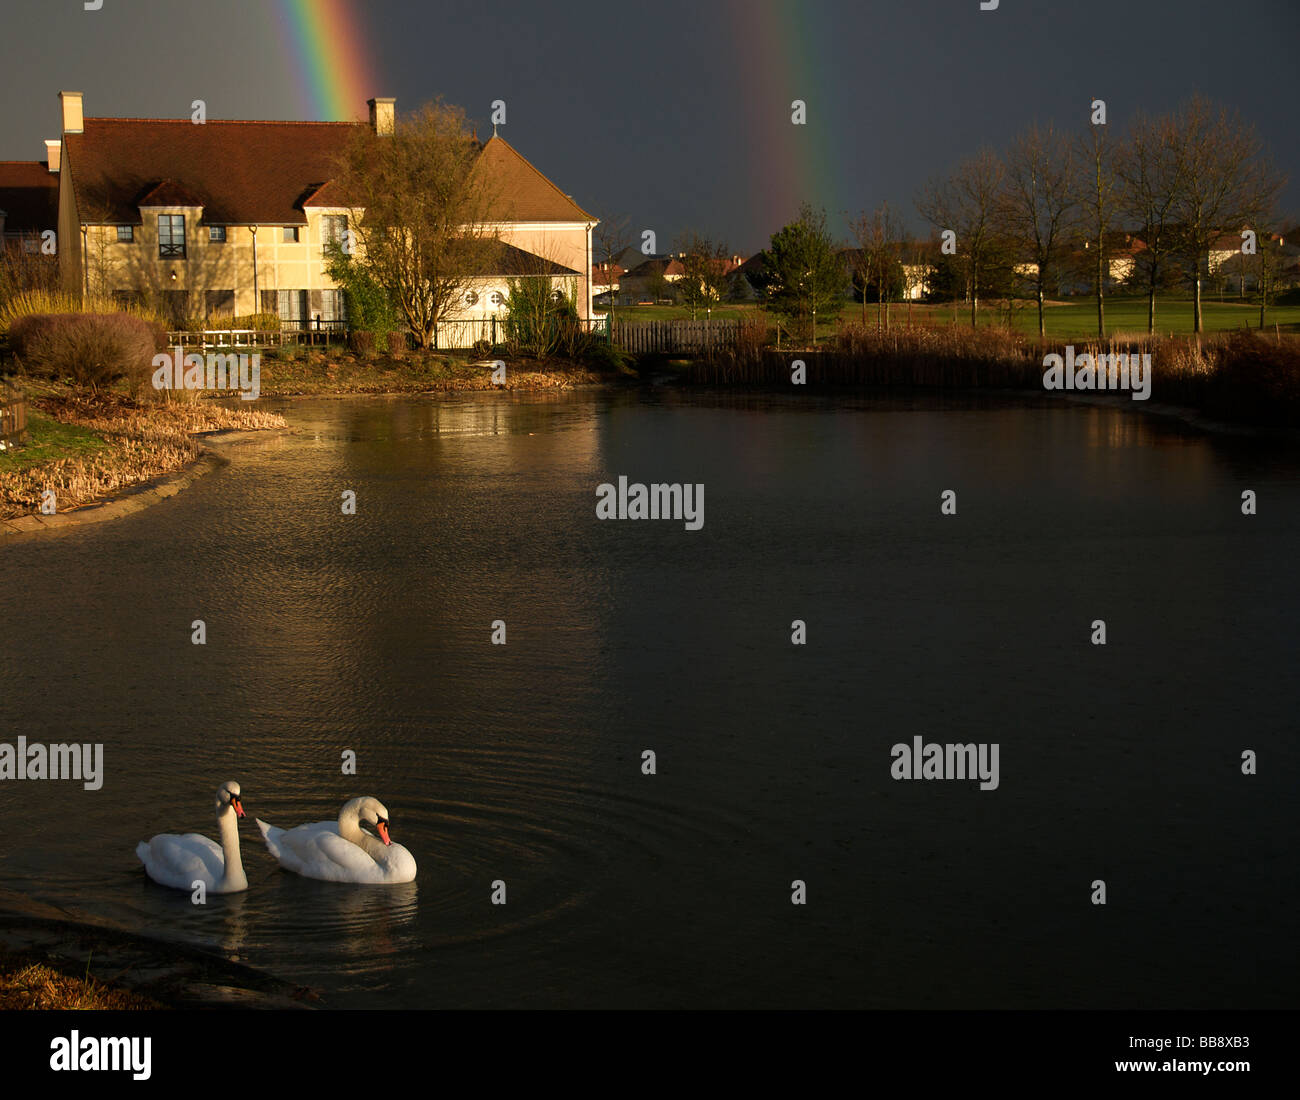 Dramatic black sky with double rainbow with two swans in foreground Northern France Stock Photo